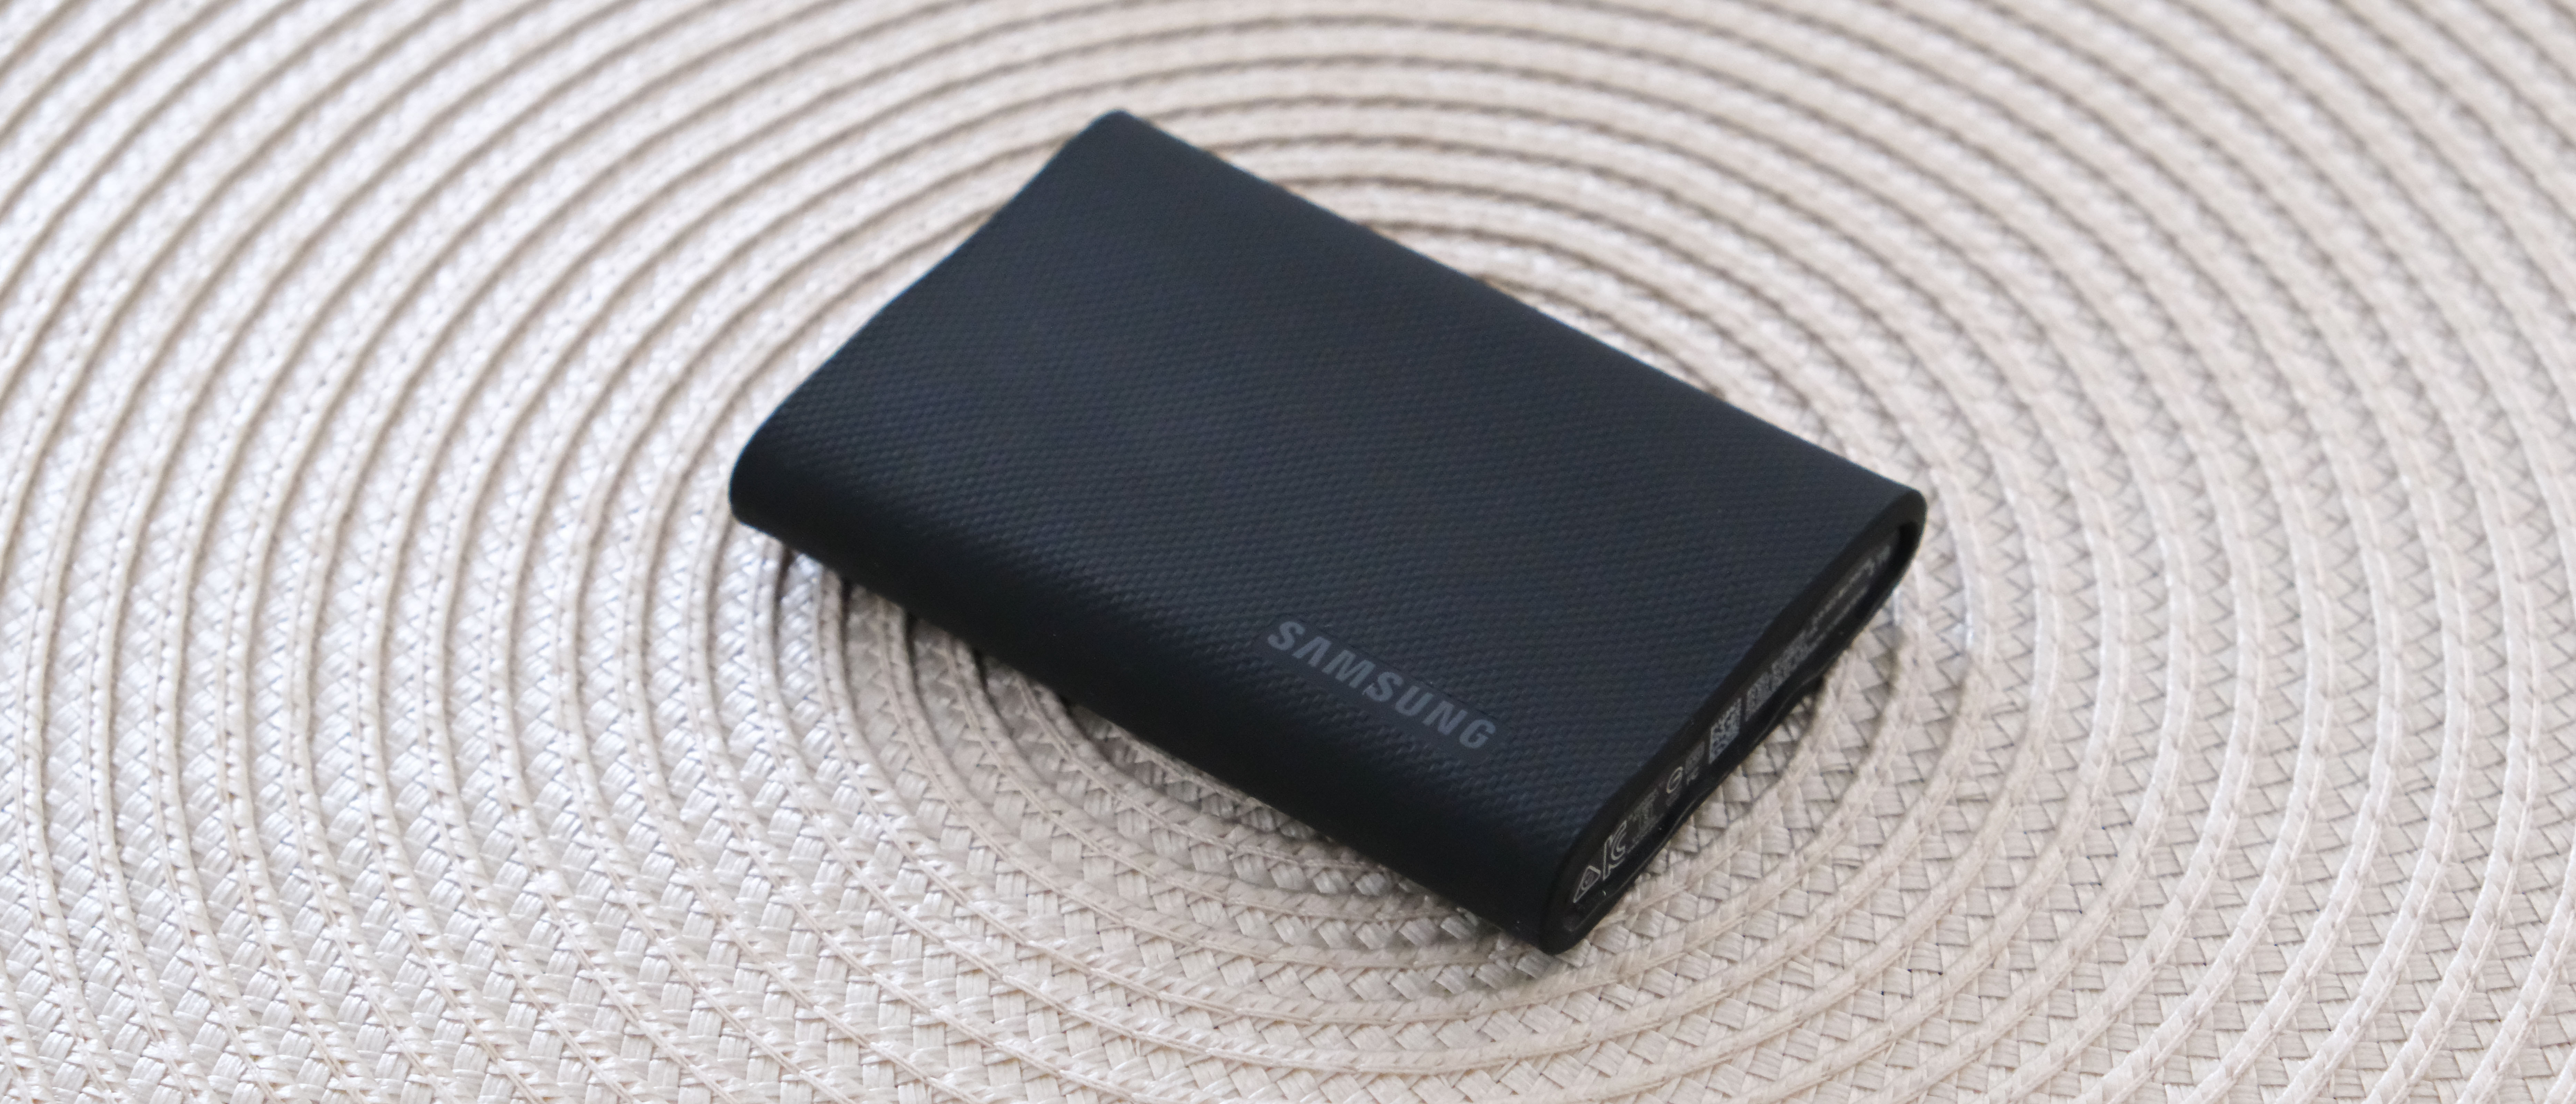 Samsung T9 SSD Review: Fast and Future Proof 